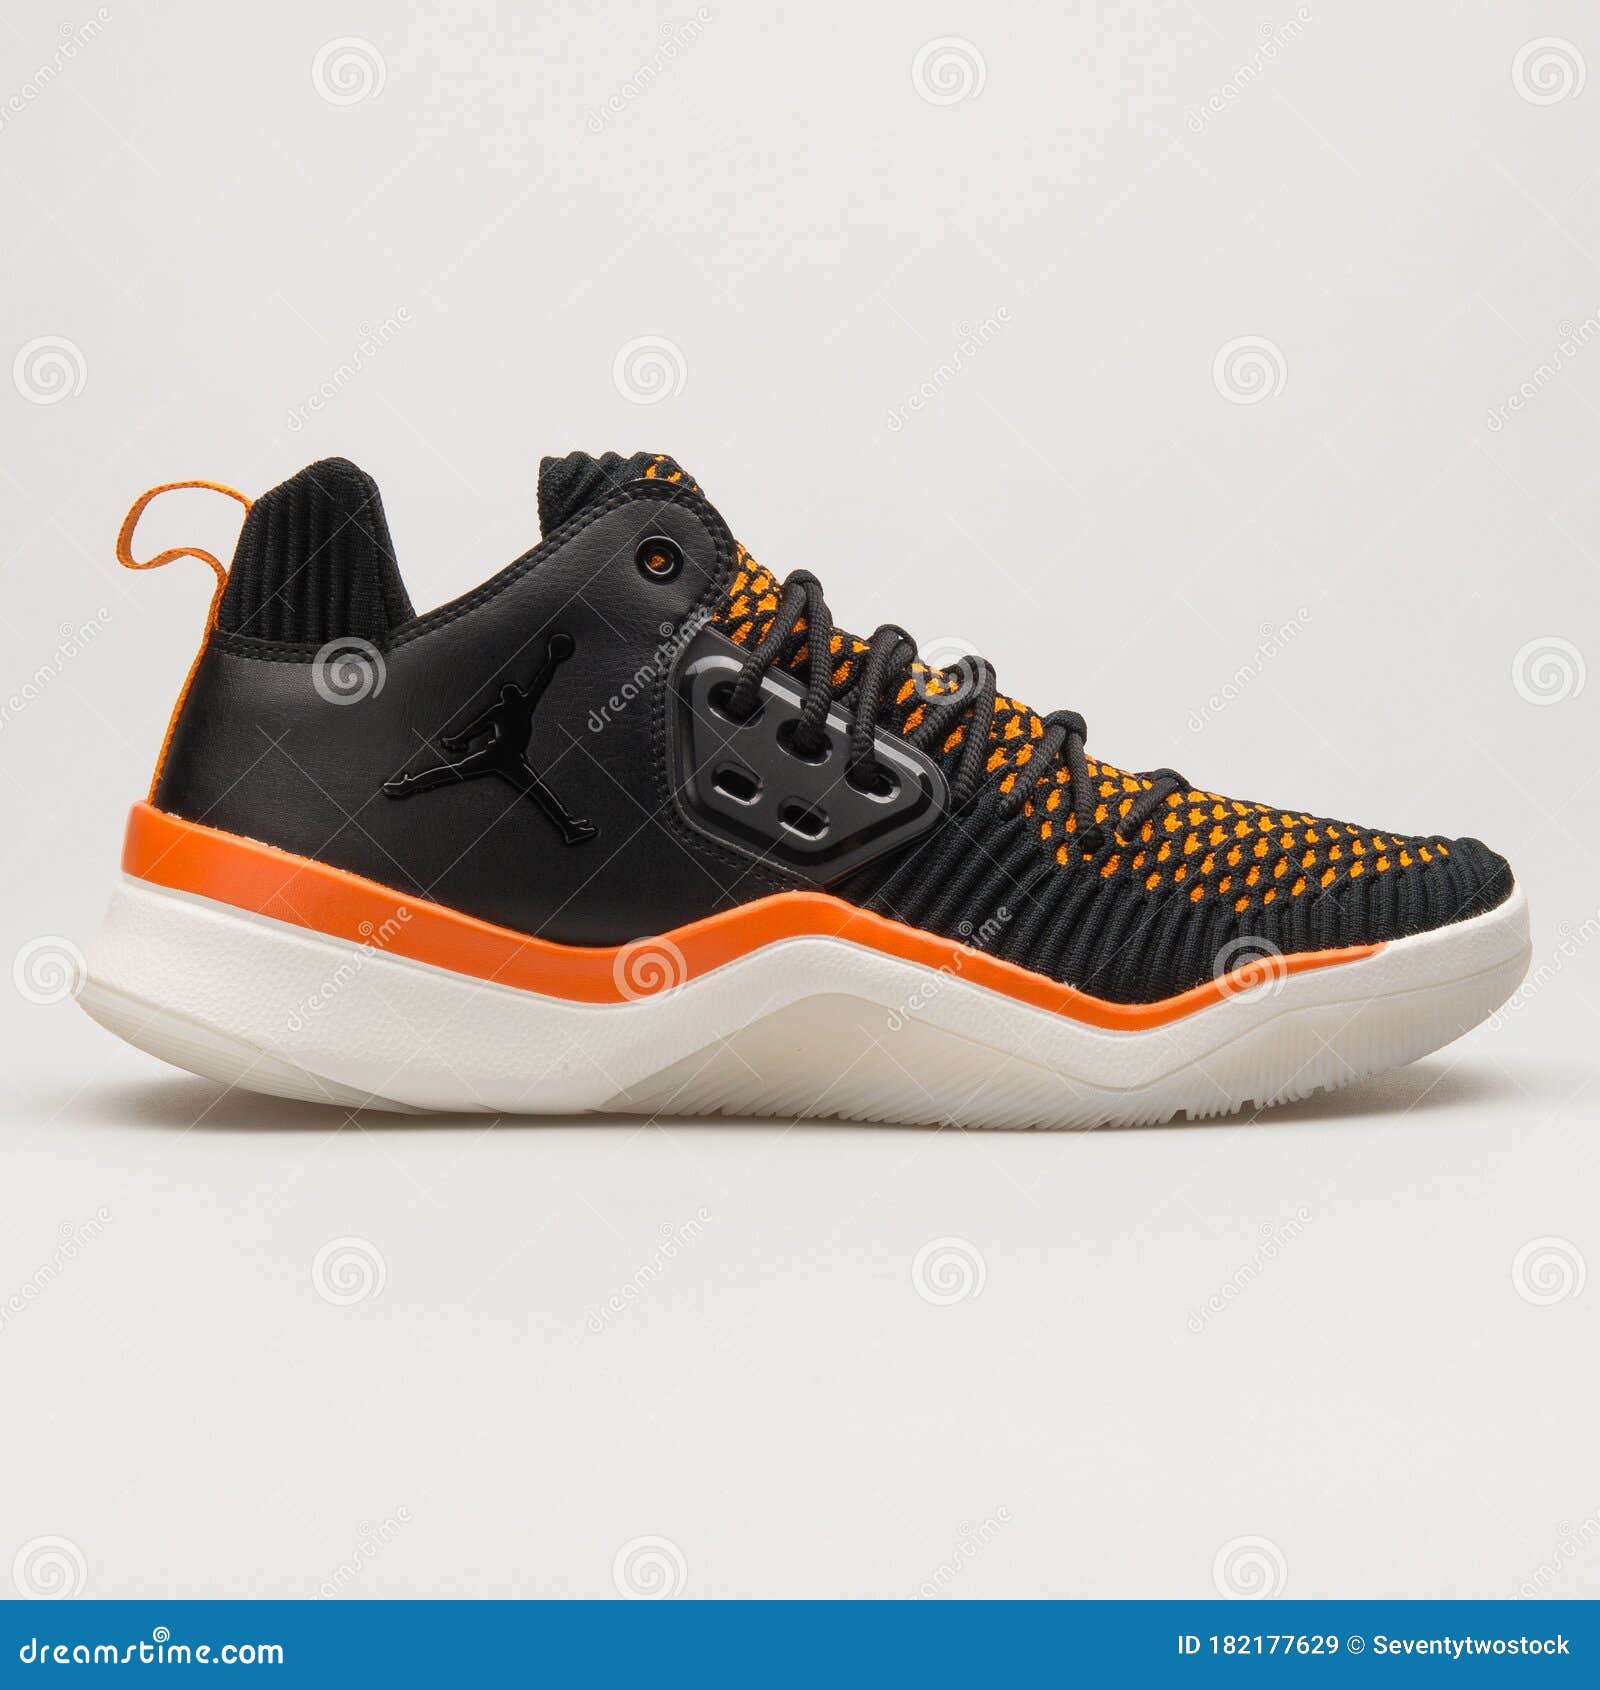 longing Scared to die exaggeration Nike Jordan DNA LX Black, Orange and Sail Sneaker Editorial Stock Image -  Image of equipment, exercise: 182177629